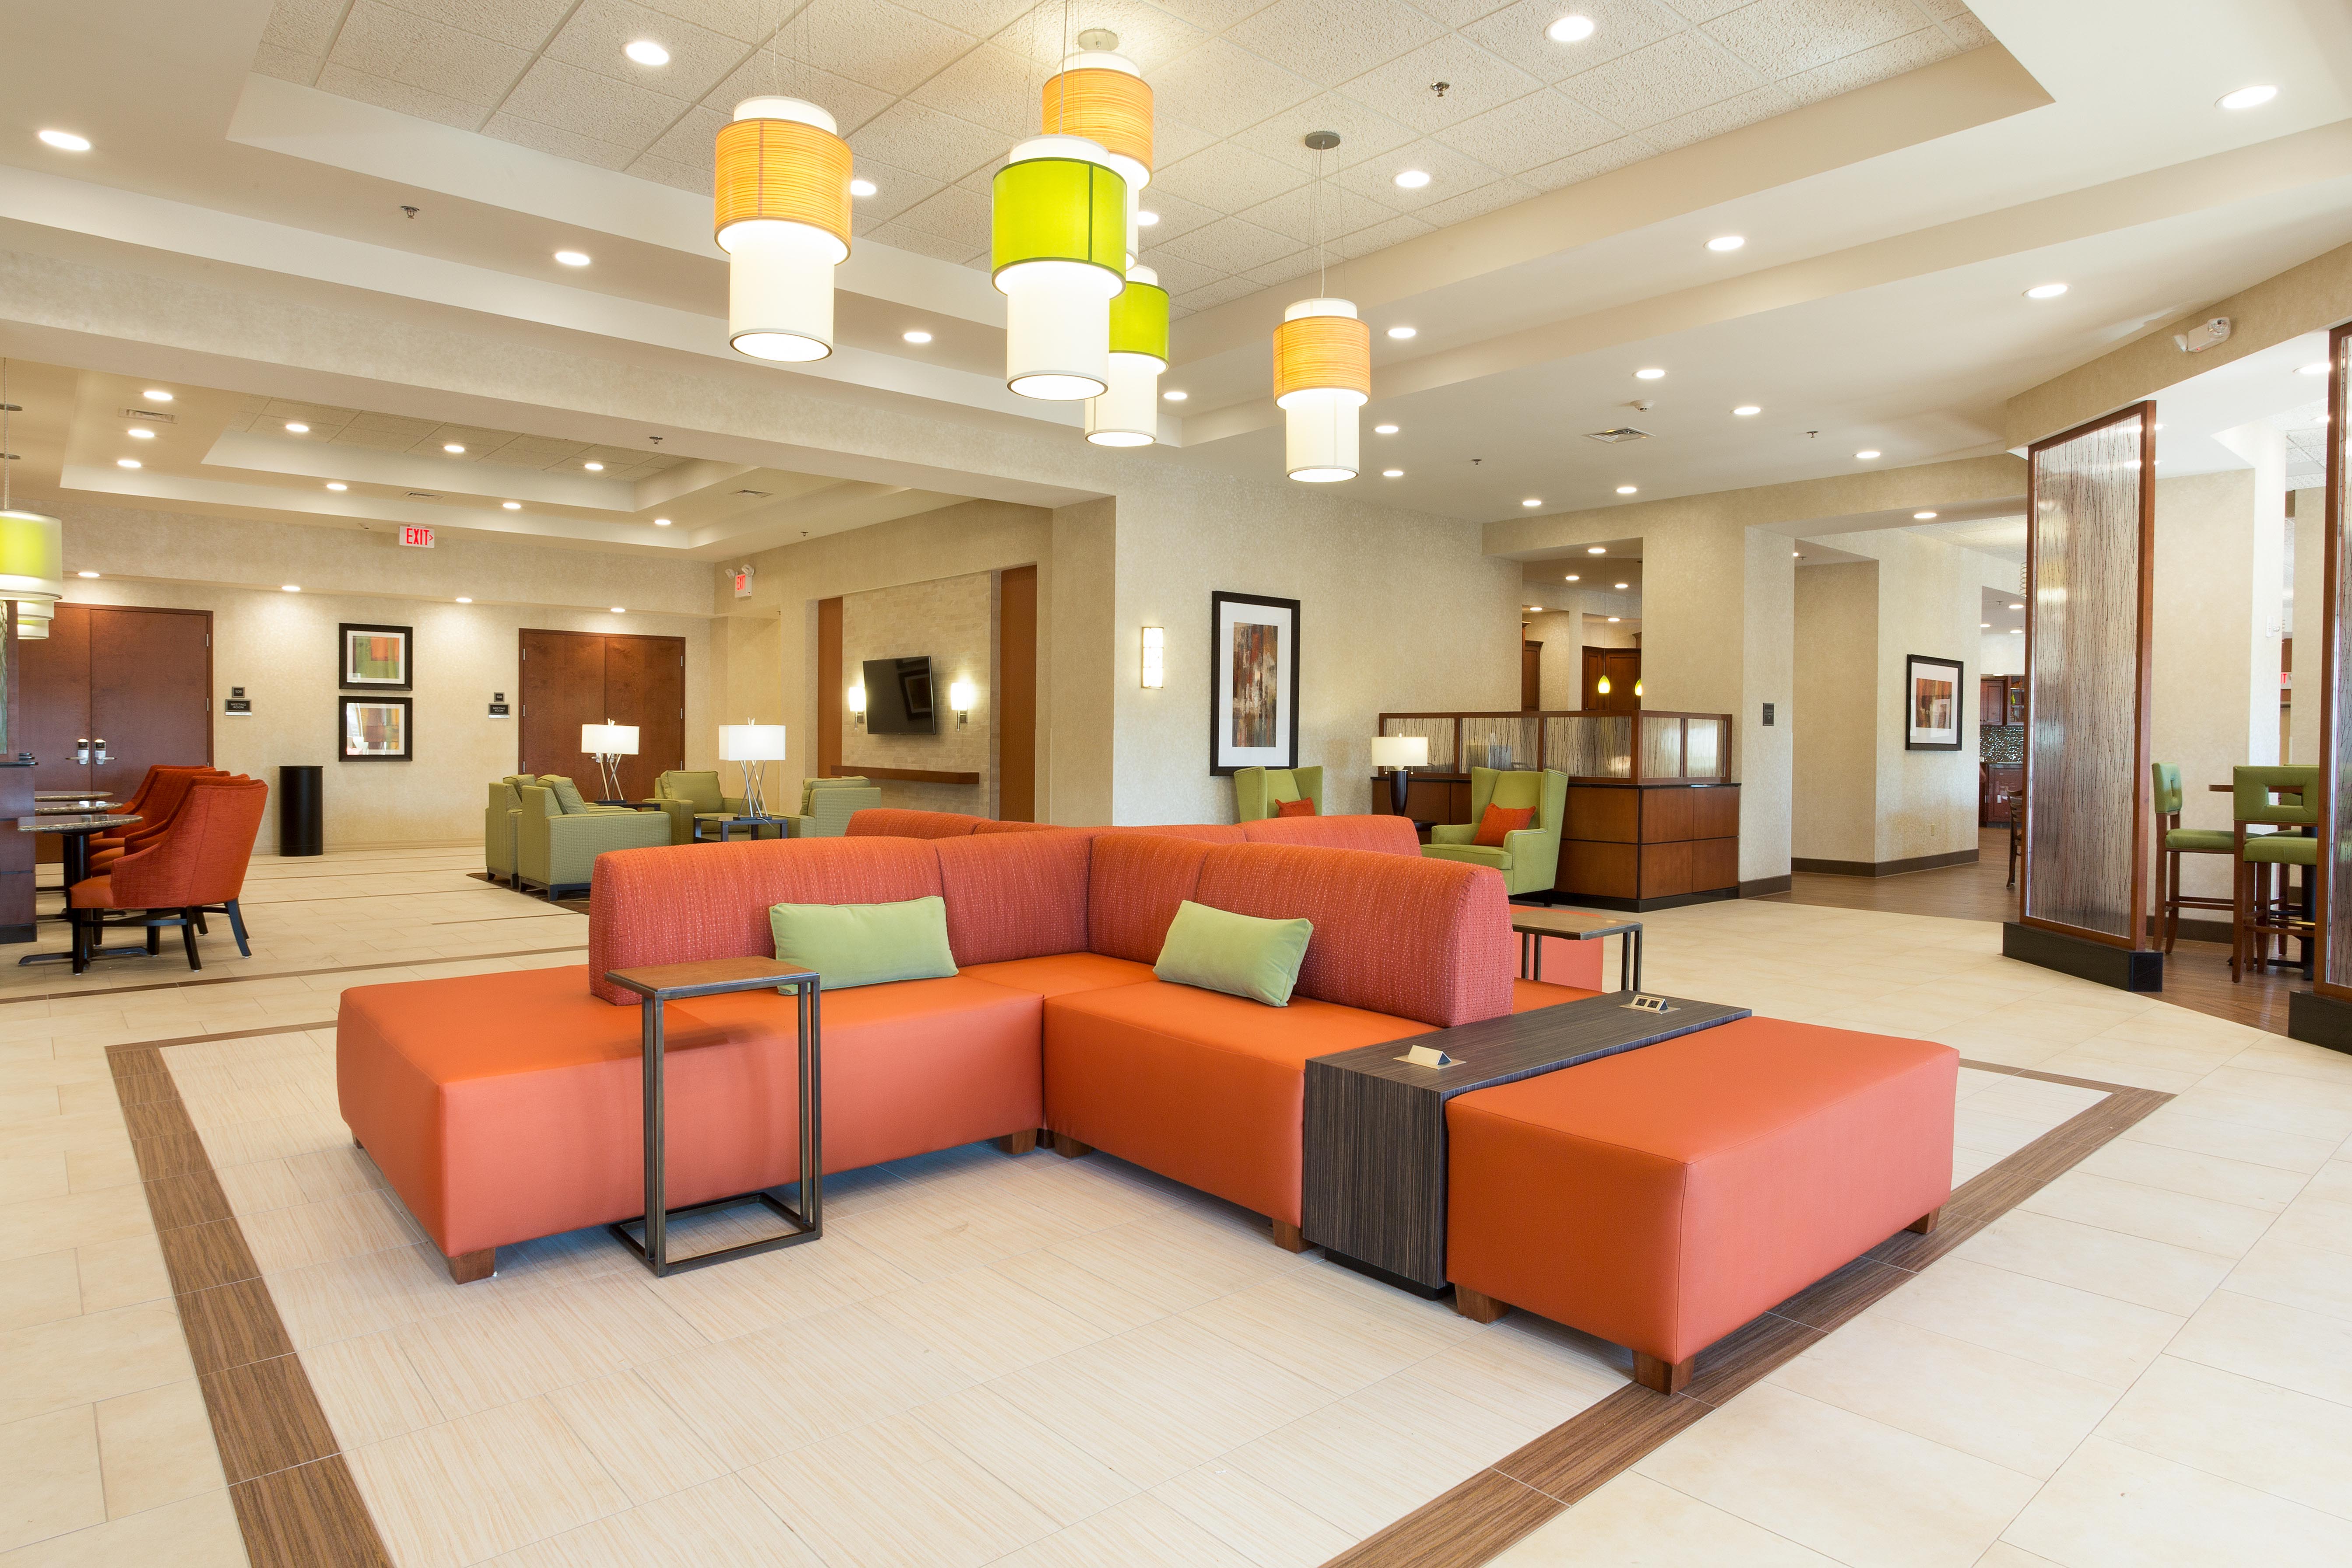 A view of the new lobby area of the new Drury Inn & Suites in Tempe, Arizona.